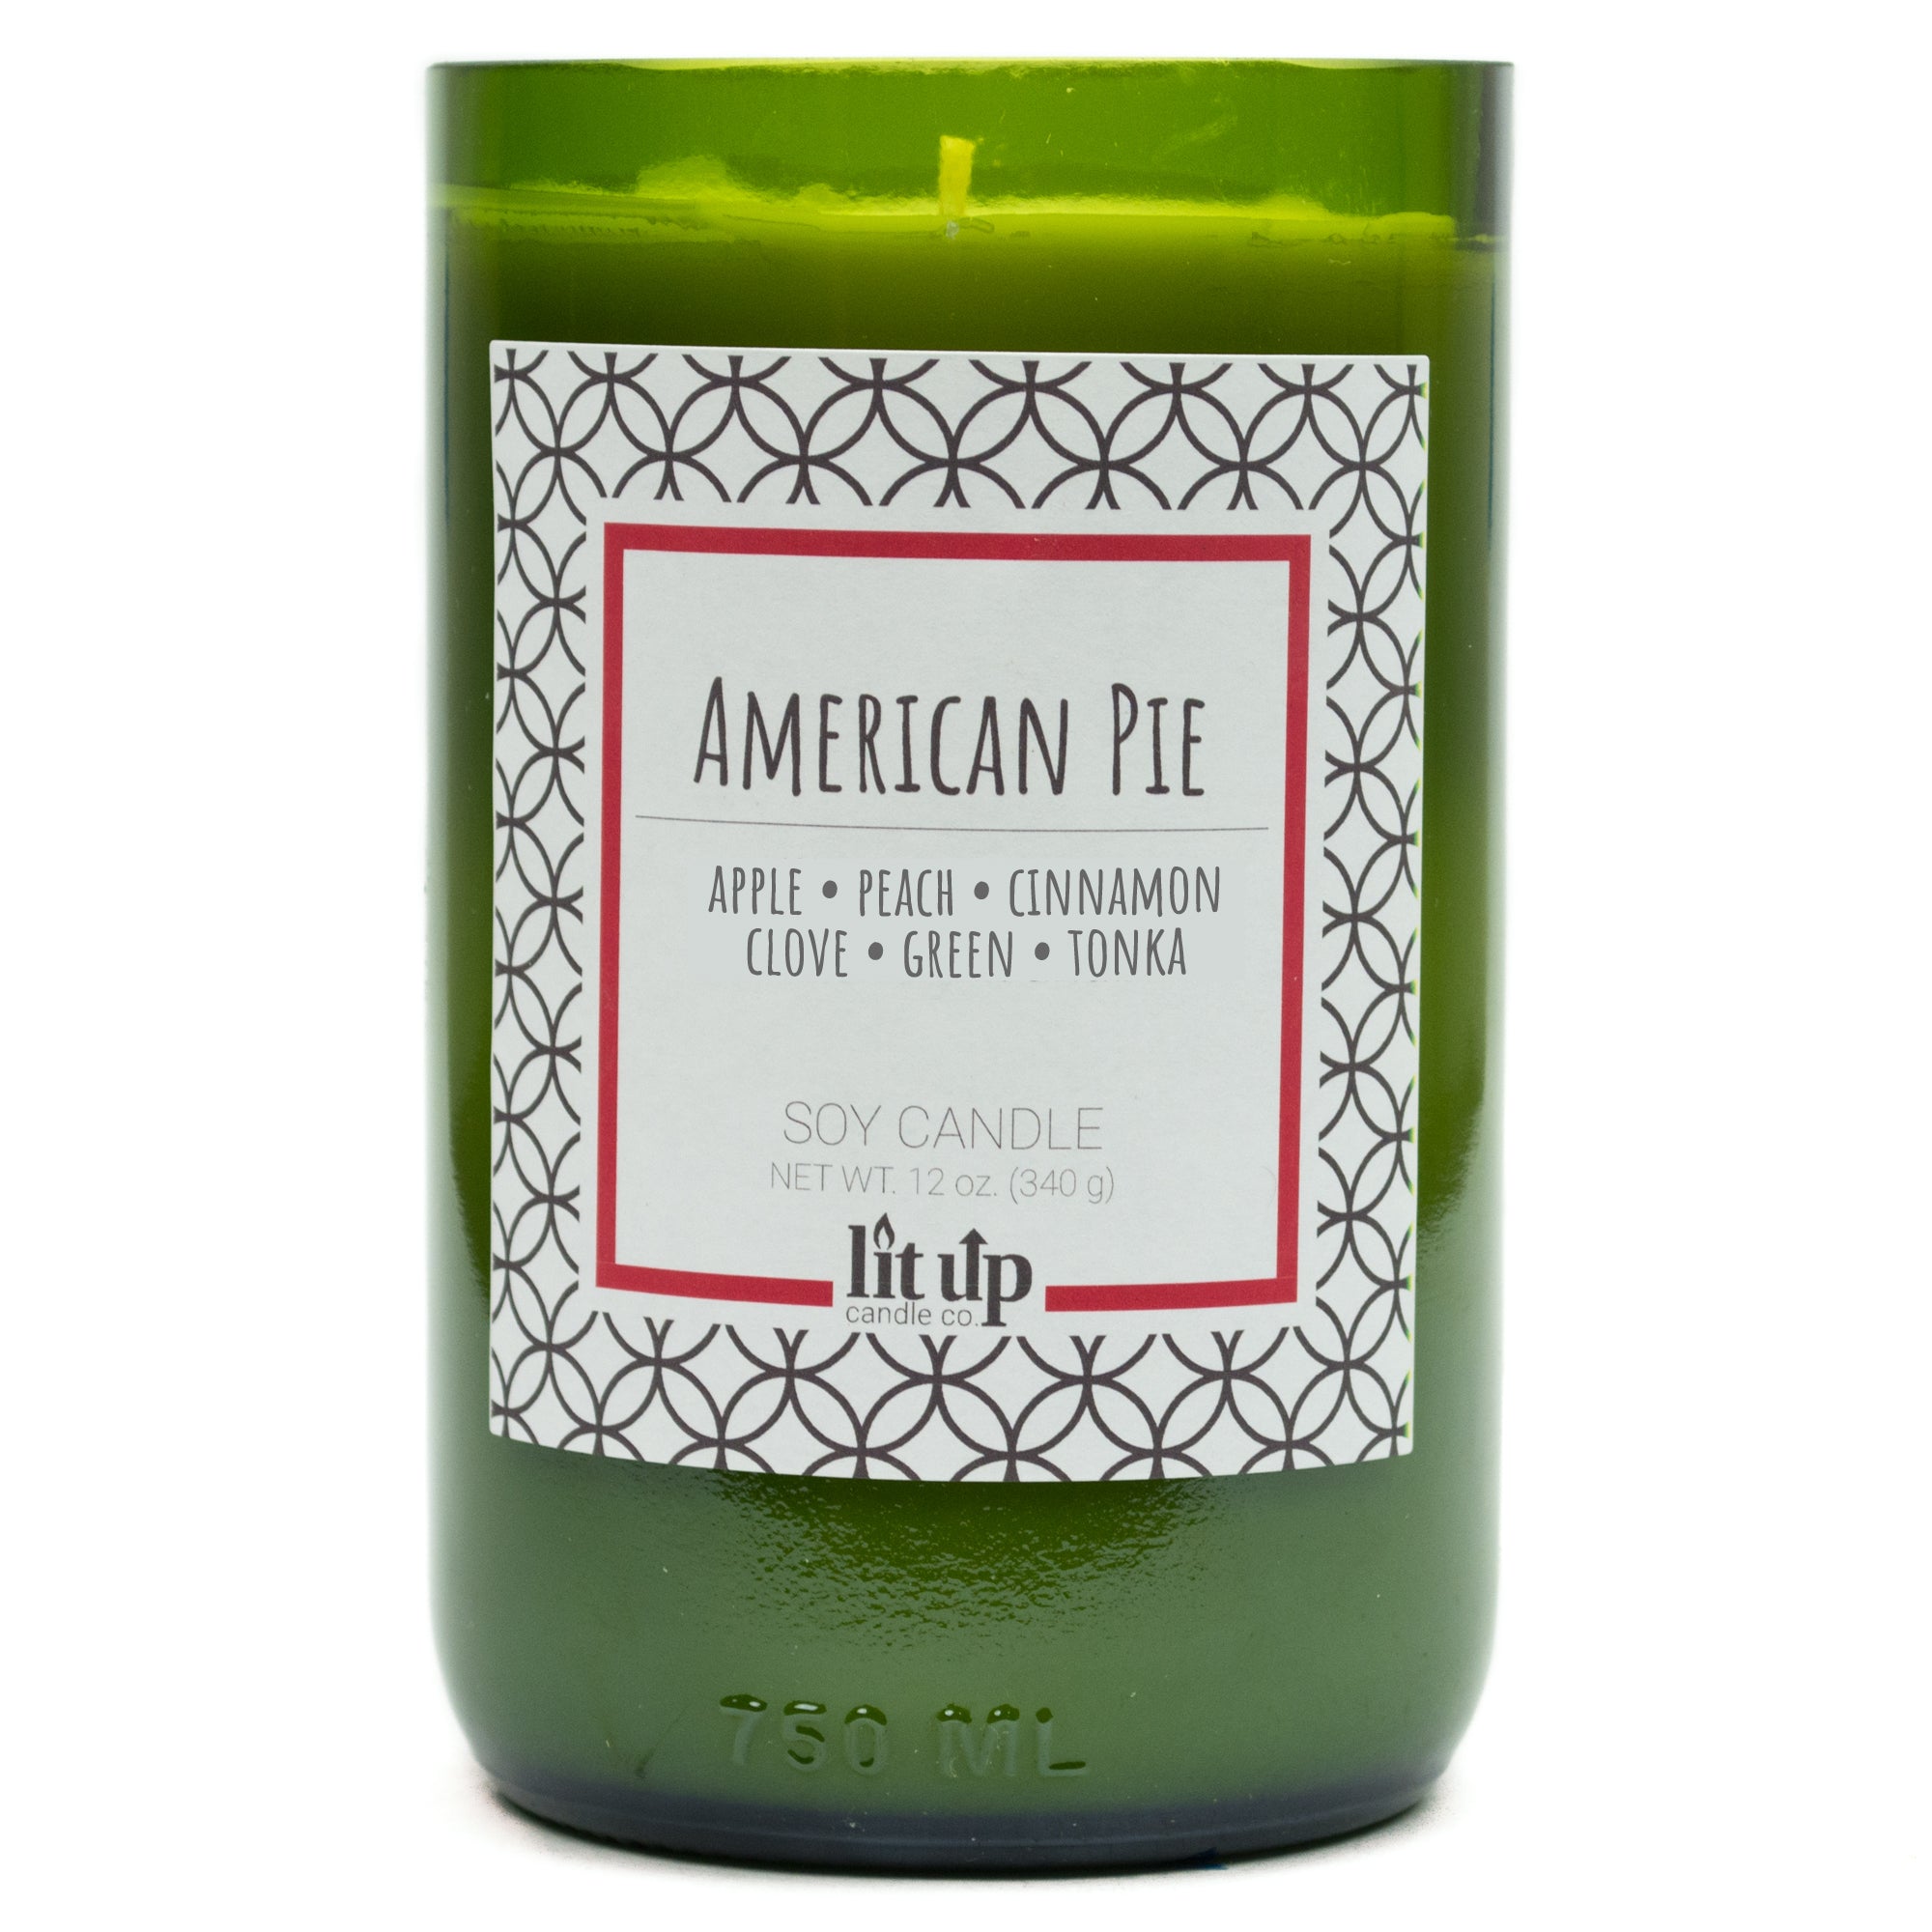 American Pie scented 12 oz. soy candle in upcycled wine bottle - NEW! Apple Cinnamon